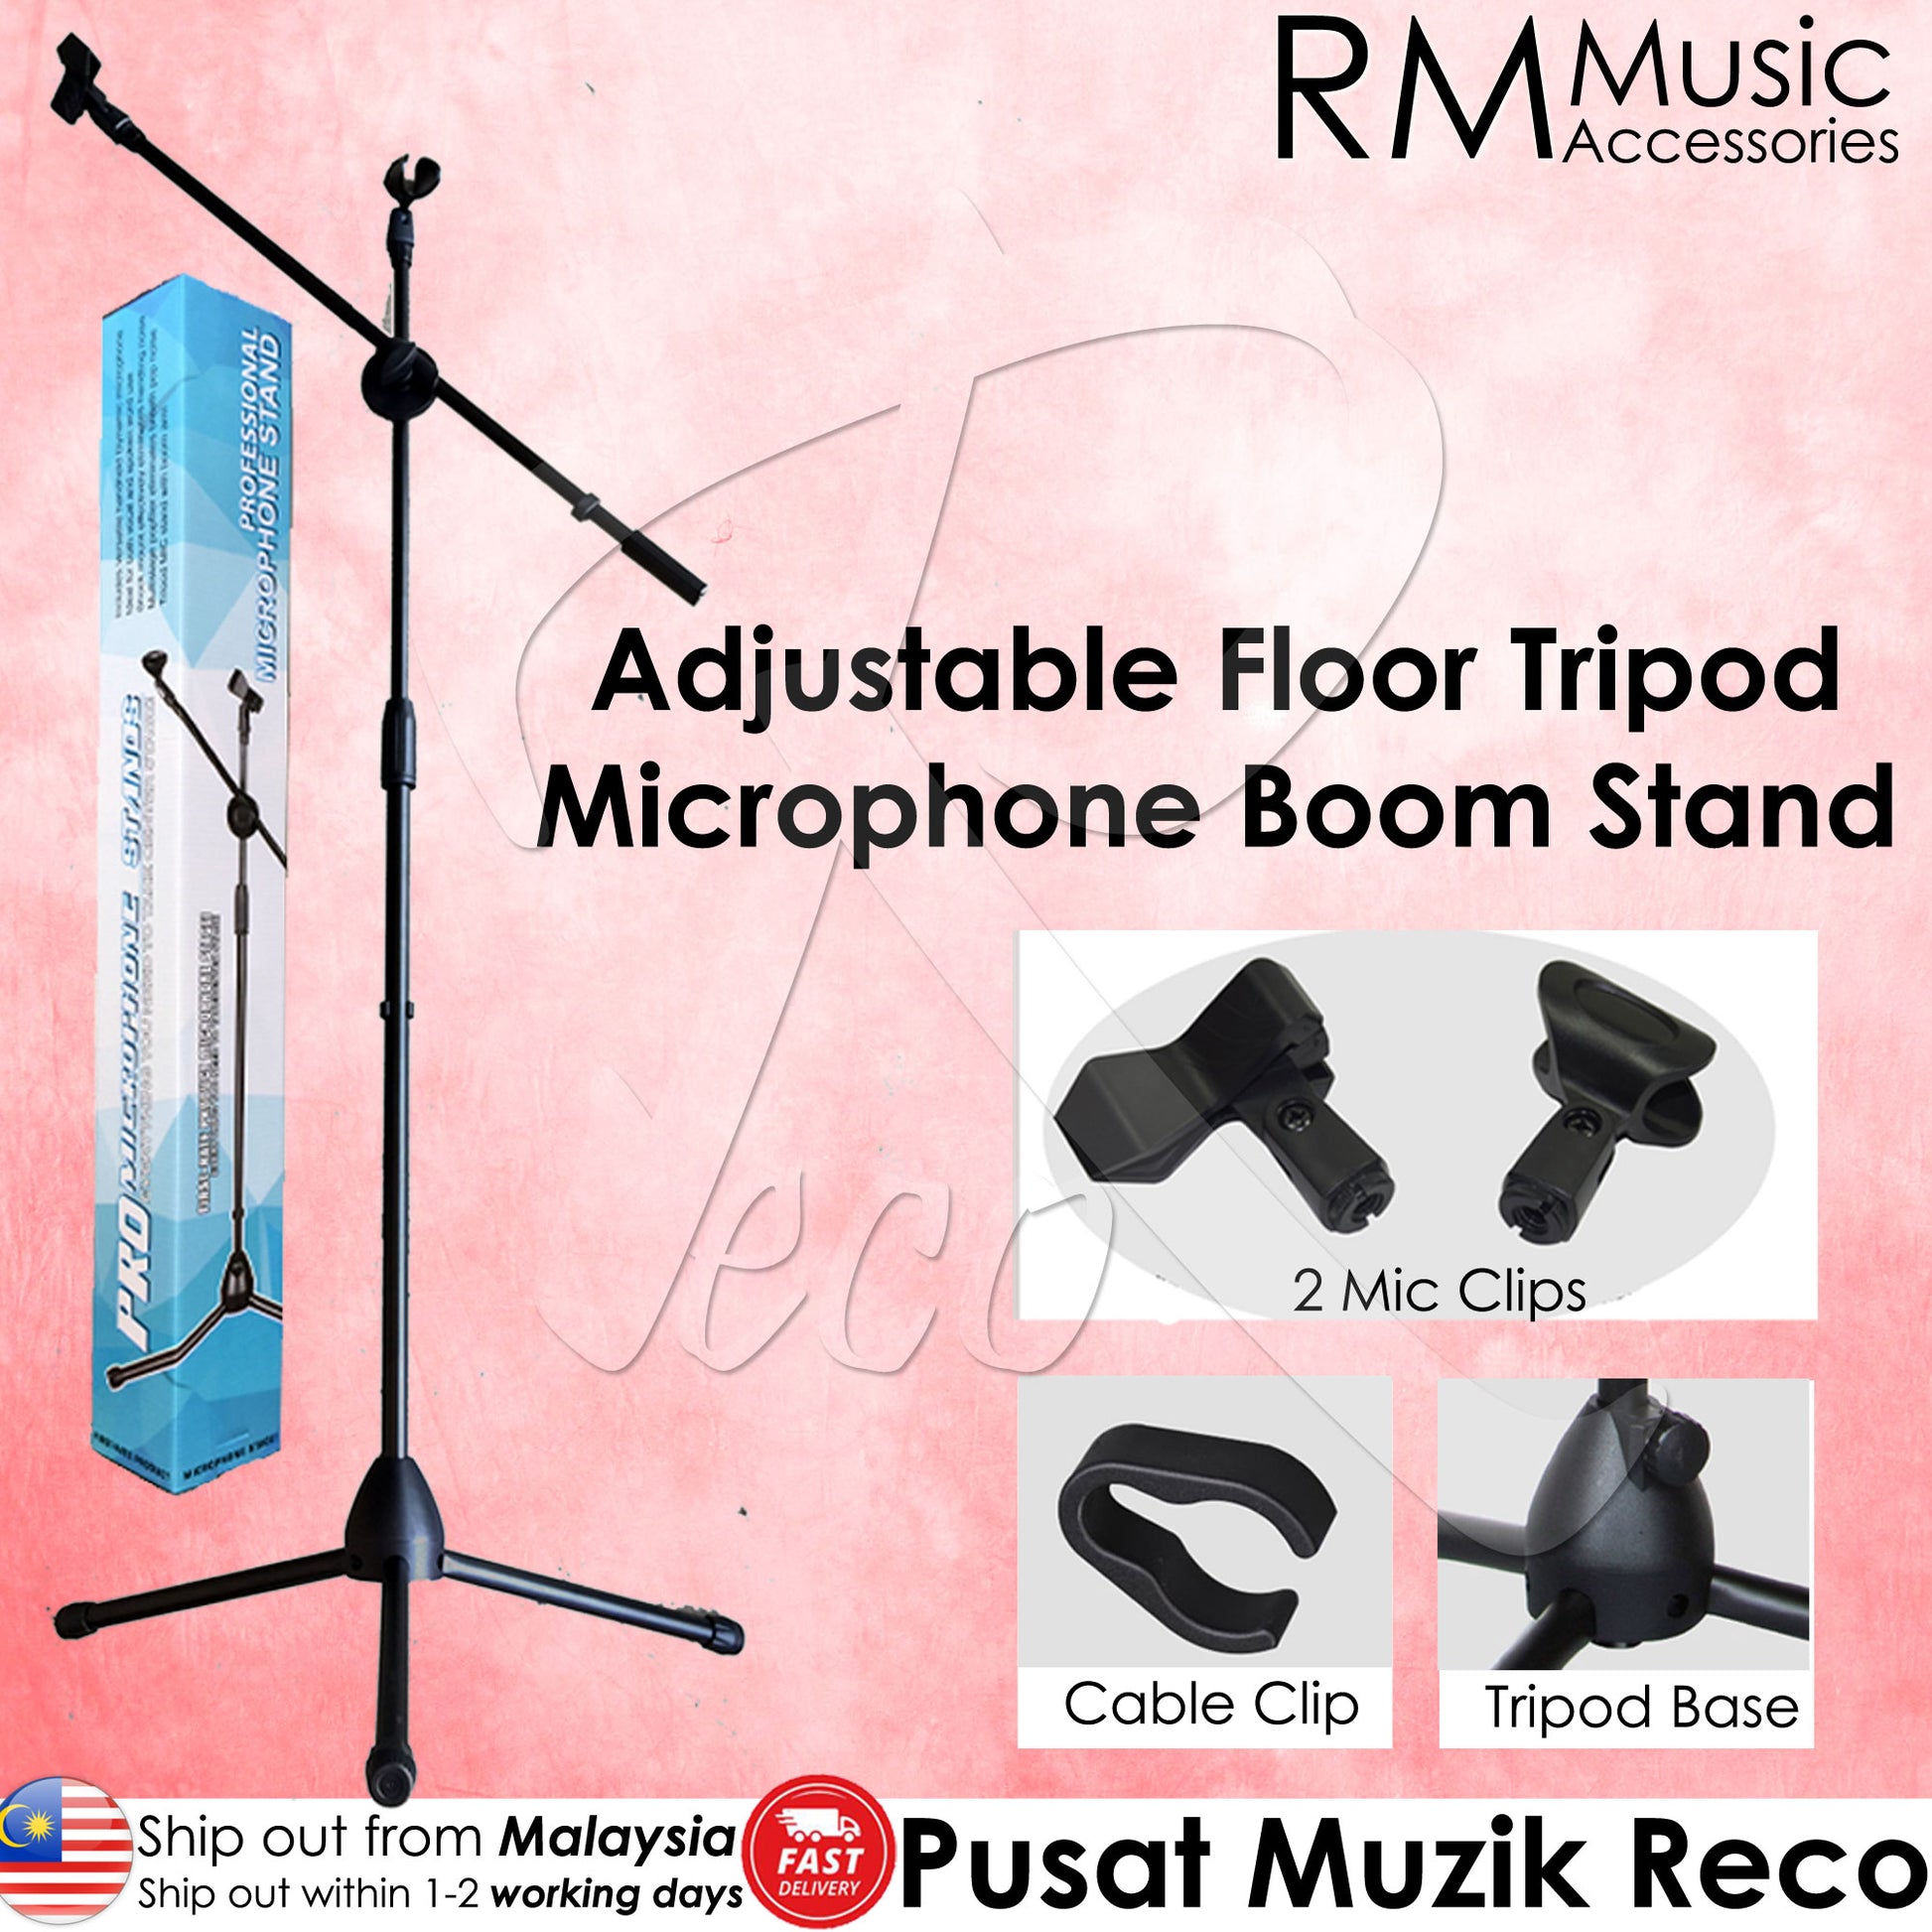 RM S70 Adjustable Floor Tripod Microphone Boom Stand - Reco Music Malaysia